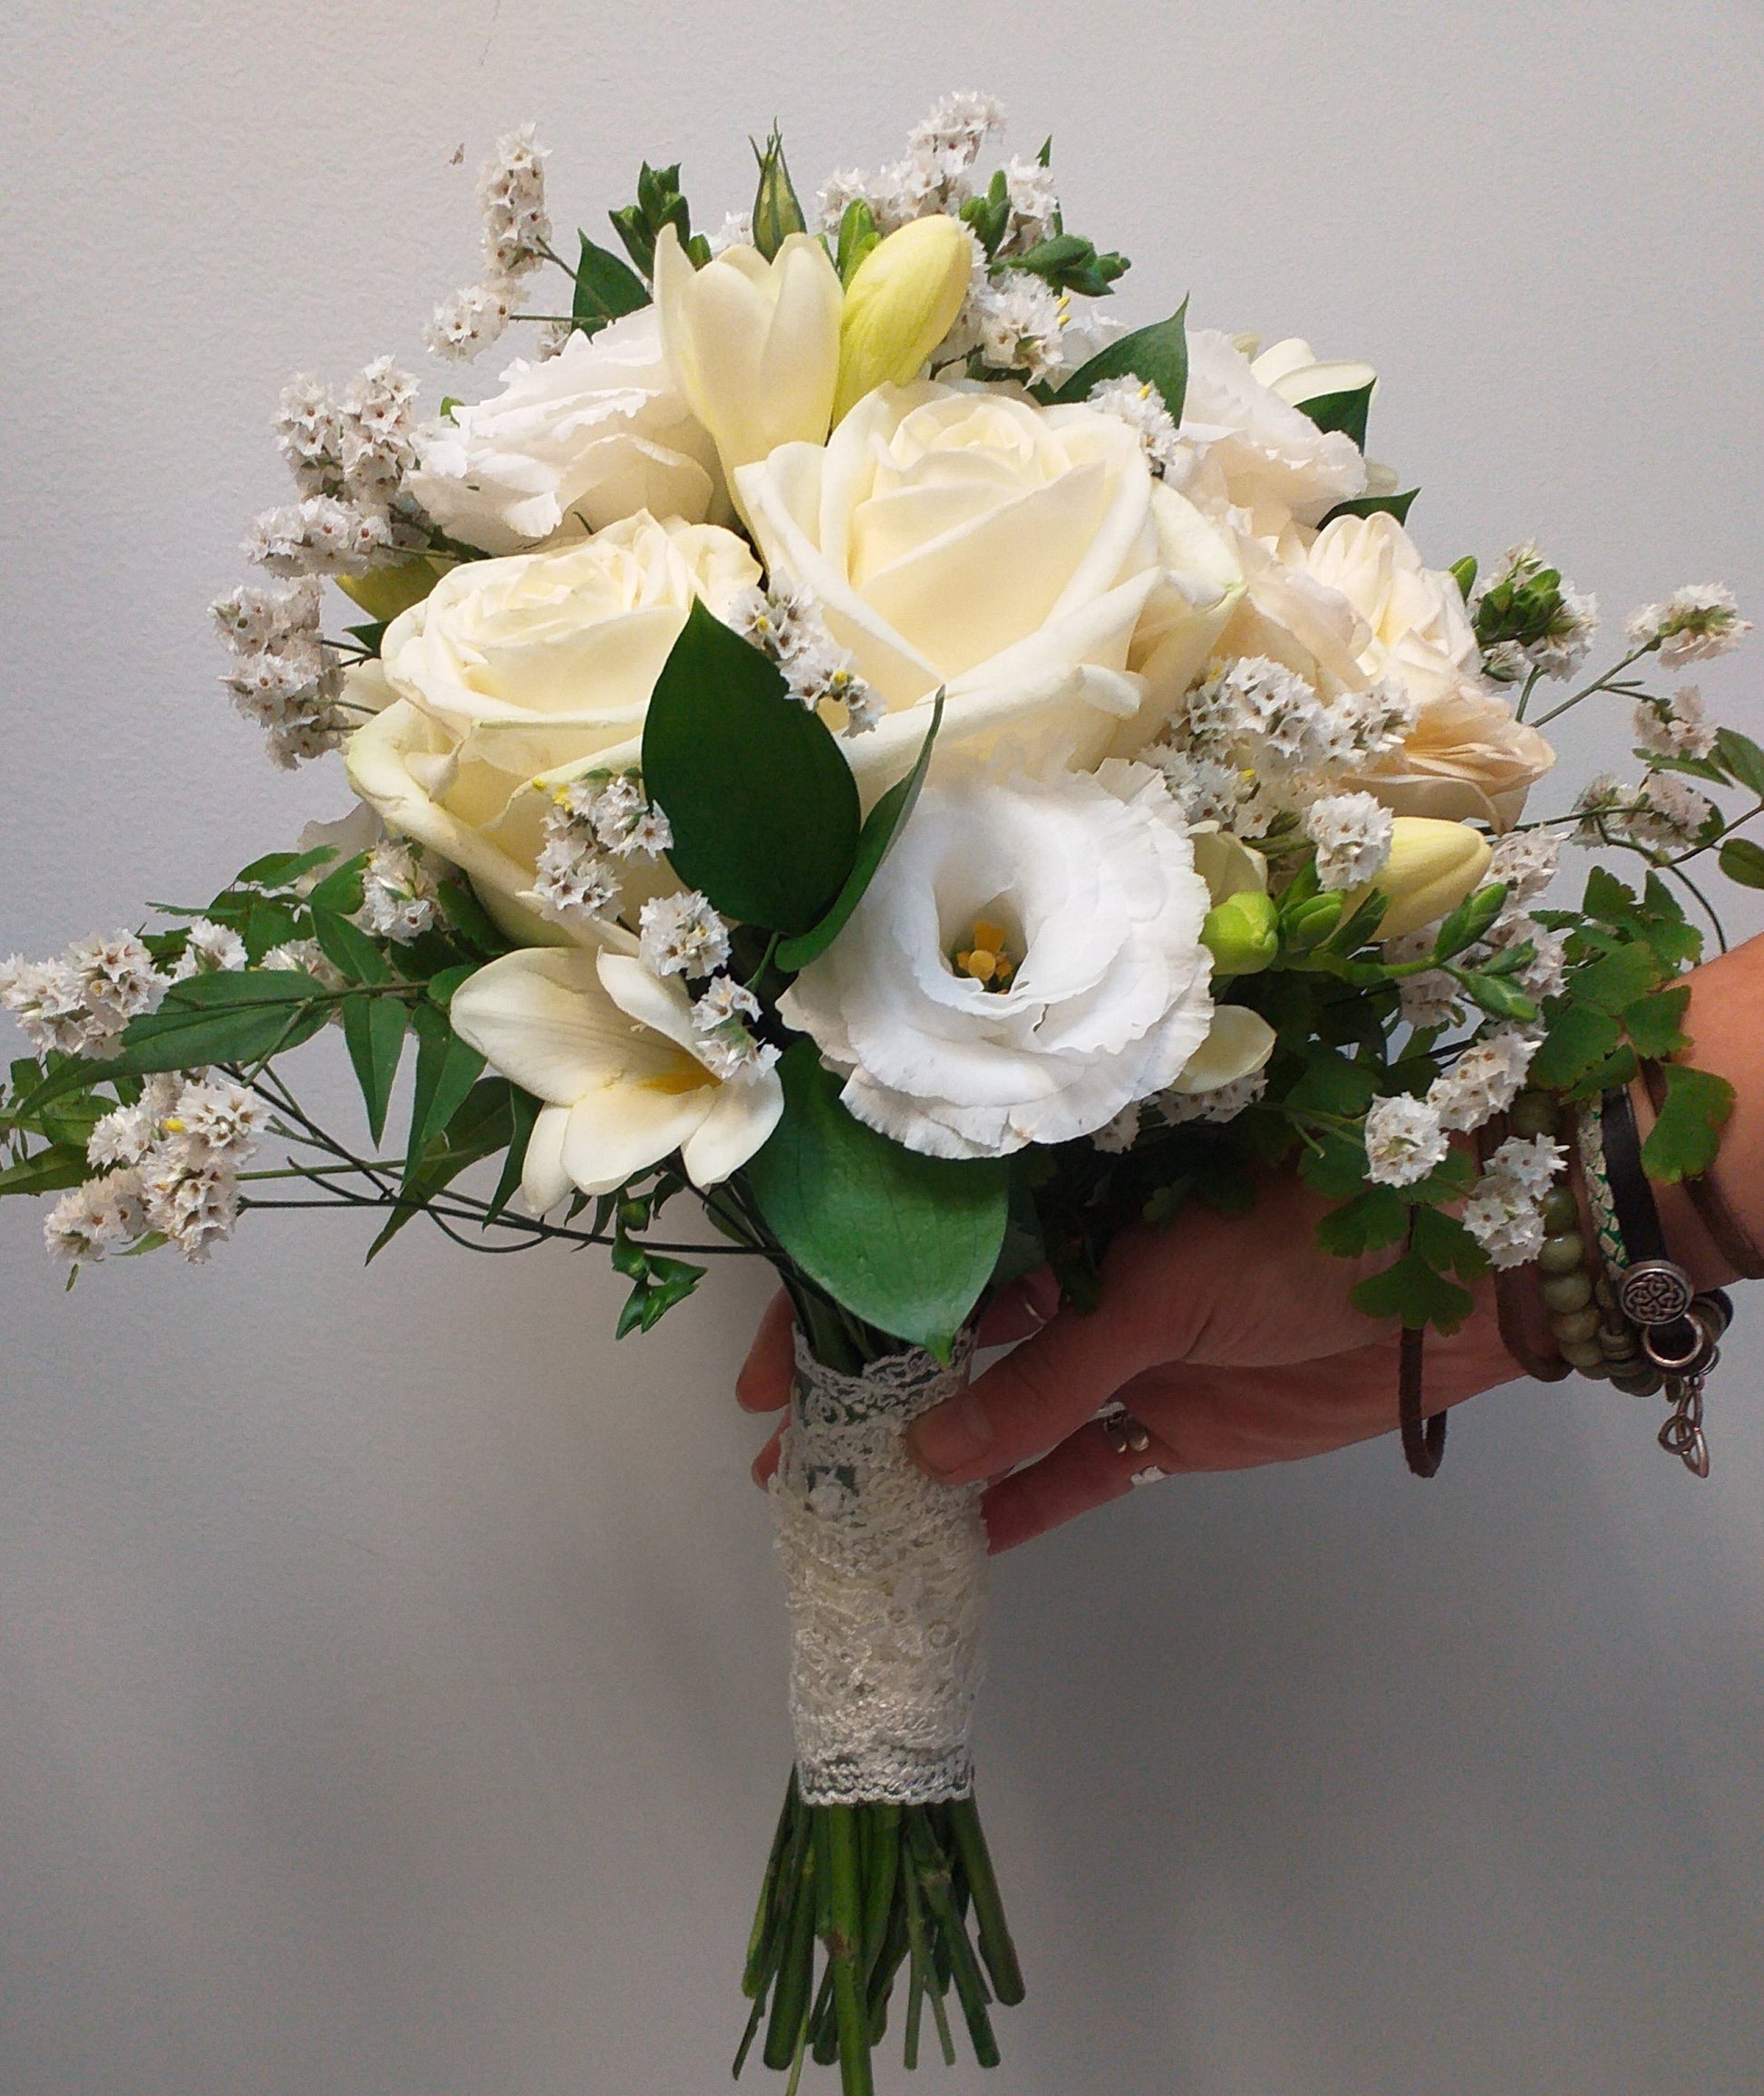 Bridal bouquet of cream roses, white freesias, white lisianthus and limonium tied with cream lace to match brides gown